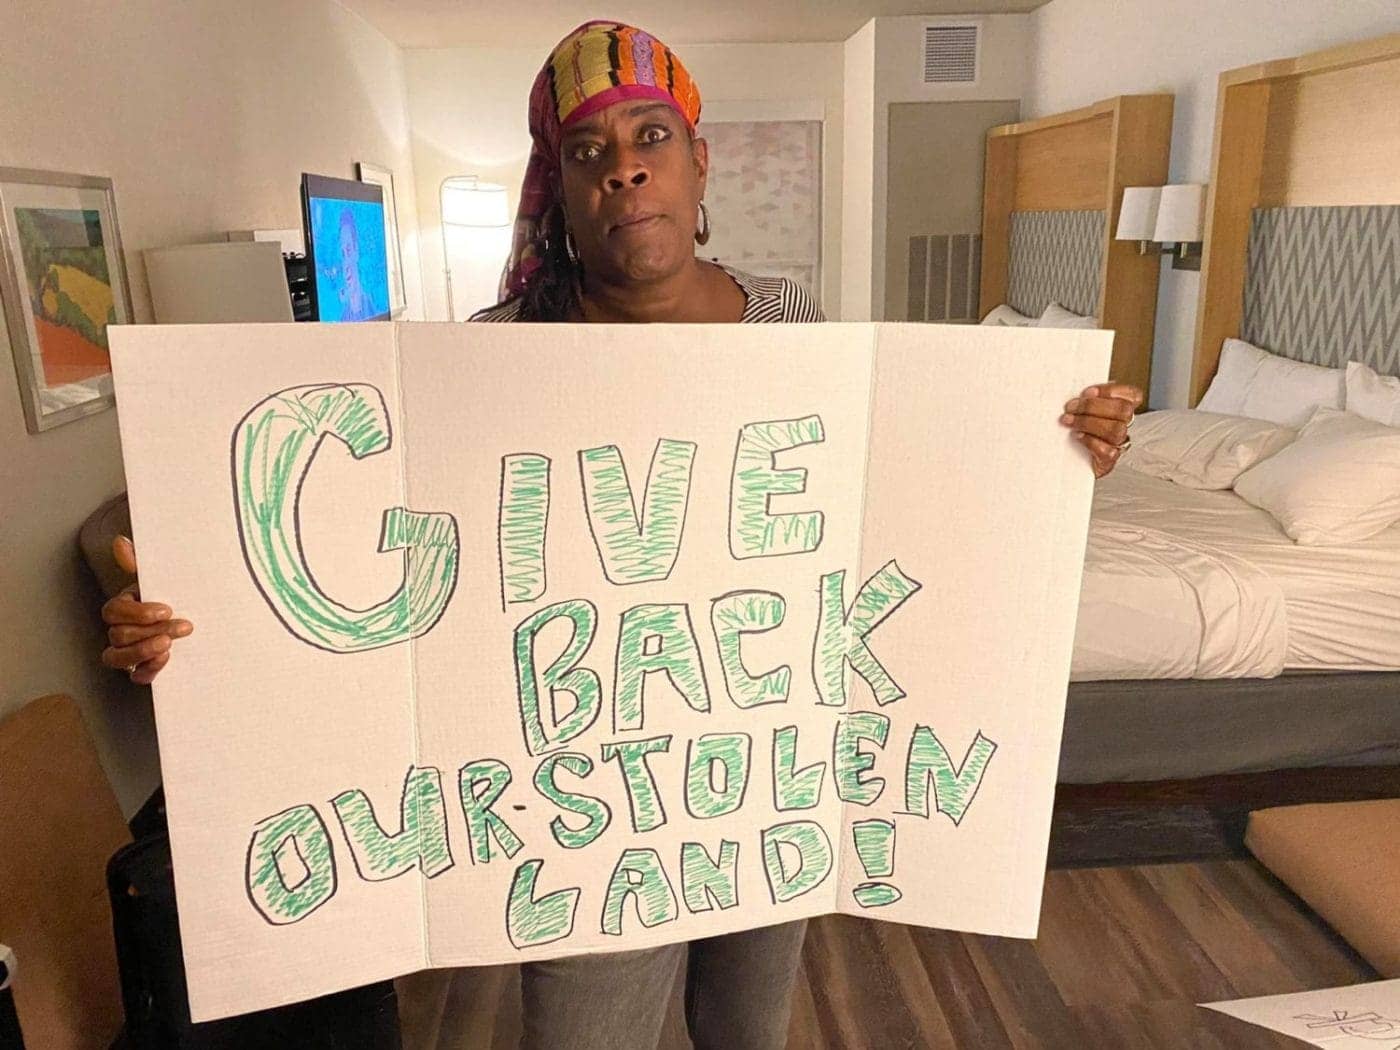 Give-back-our-stolen-land-Aunti-Frances-Moore-promotes-LandBack-from-motel-room-on-Pacific-Northwest-UnTour-by-PNN-1400x1050, A State of Emergency … for people sleeping outside, Local News & Views 